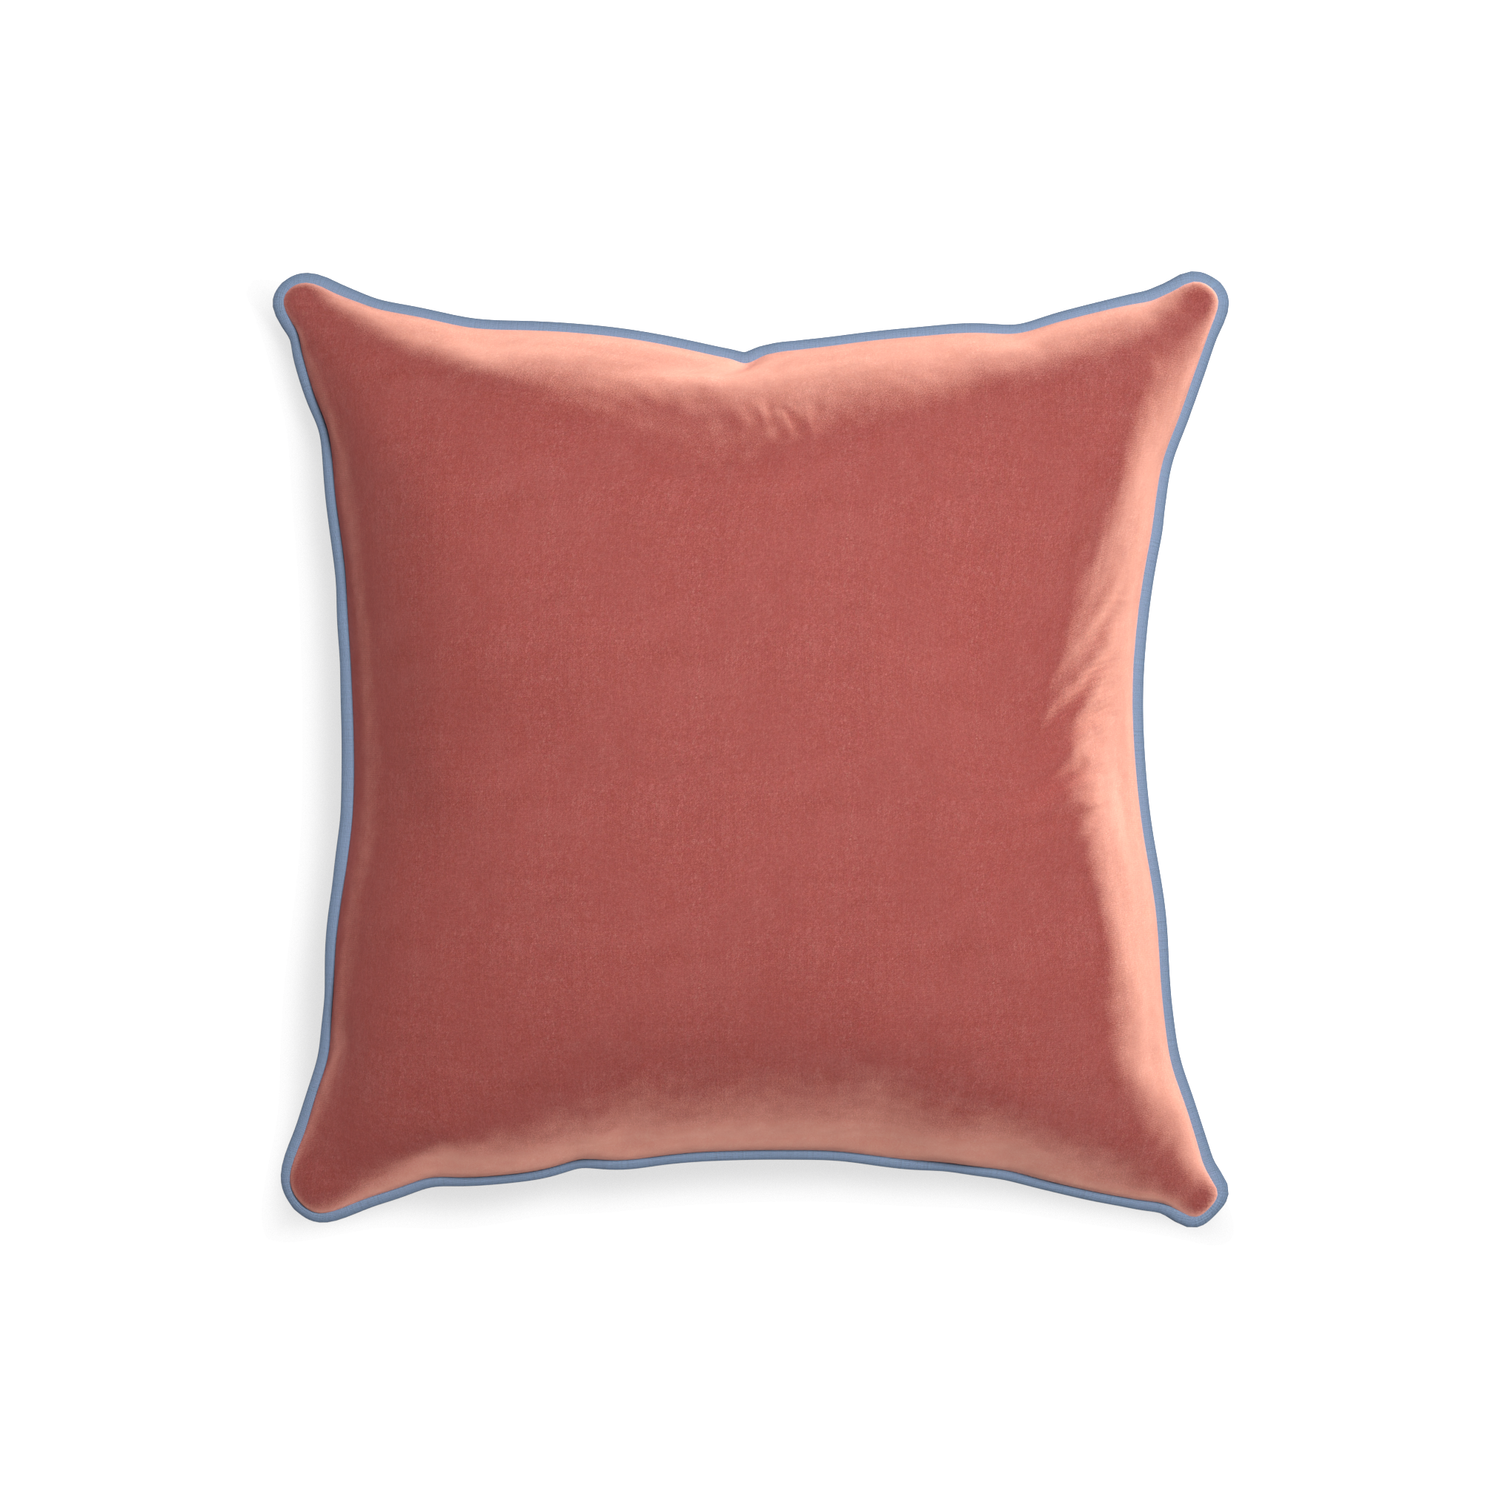 20-square cosmo velvet custom coralpillow with sky piping on white background